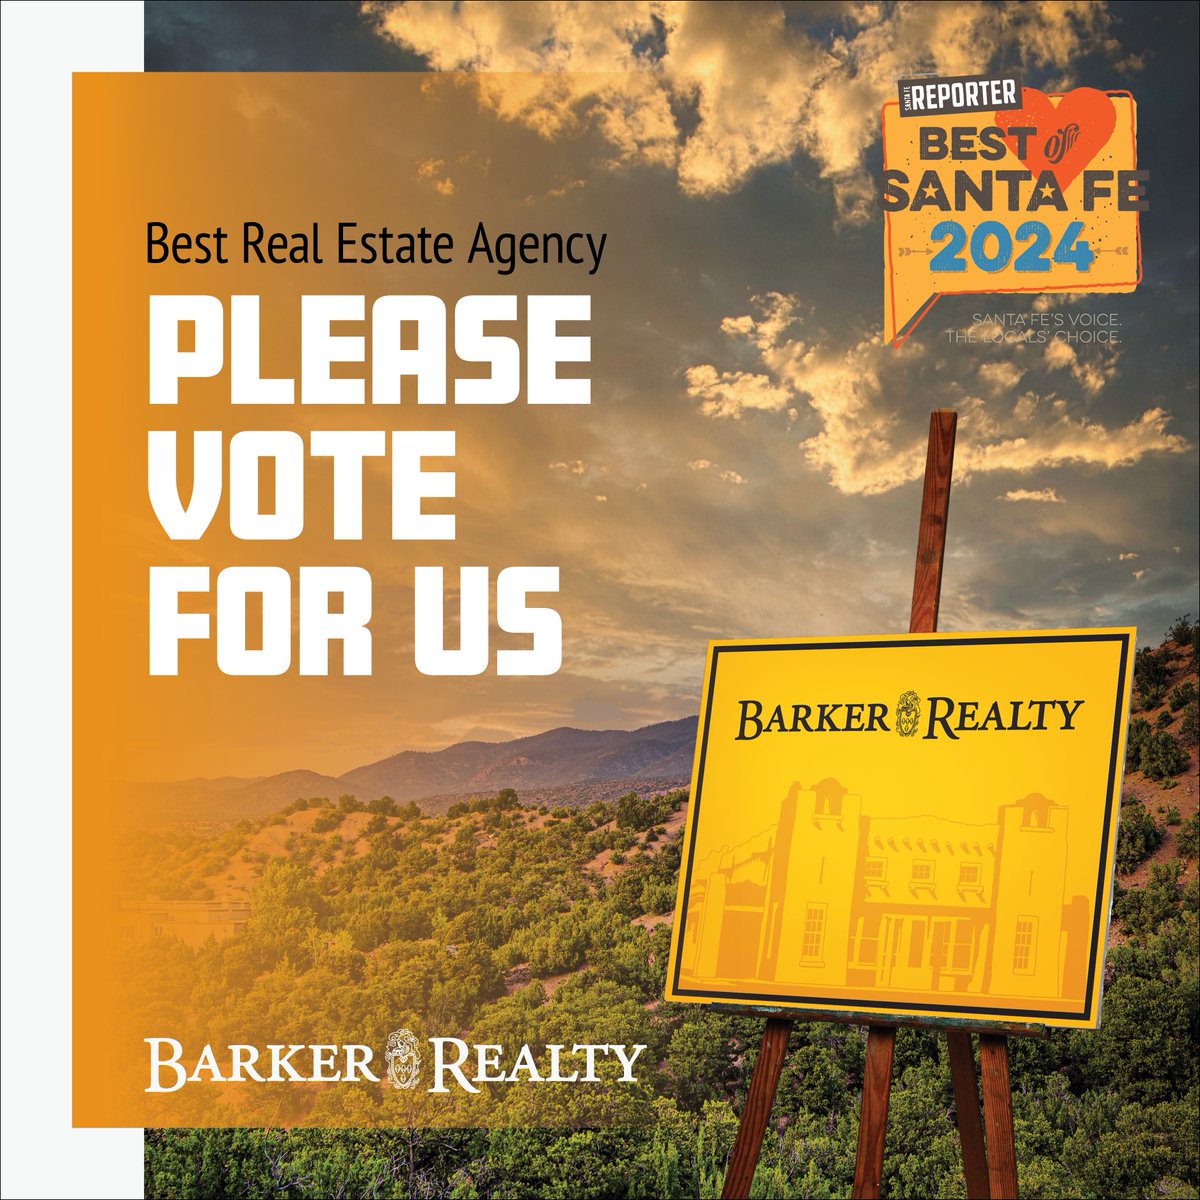 VOTE Barker Realty :: Best Real Estate Agency!!
👉  vote.sfreporter.com/home-services/…
We ❤️ you and appreciate you, Santa Fe! The Locals' Choice for over 50 years.

.

#bosf2024 #santafe #howtosantafe #santaferealestate #thecitydifferent #santafenm #santafeliving